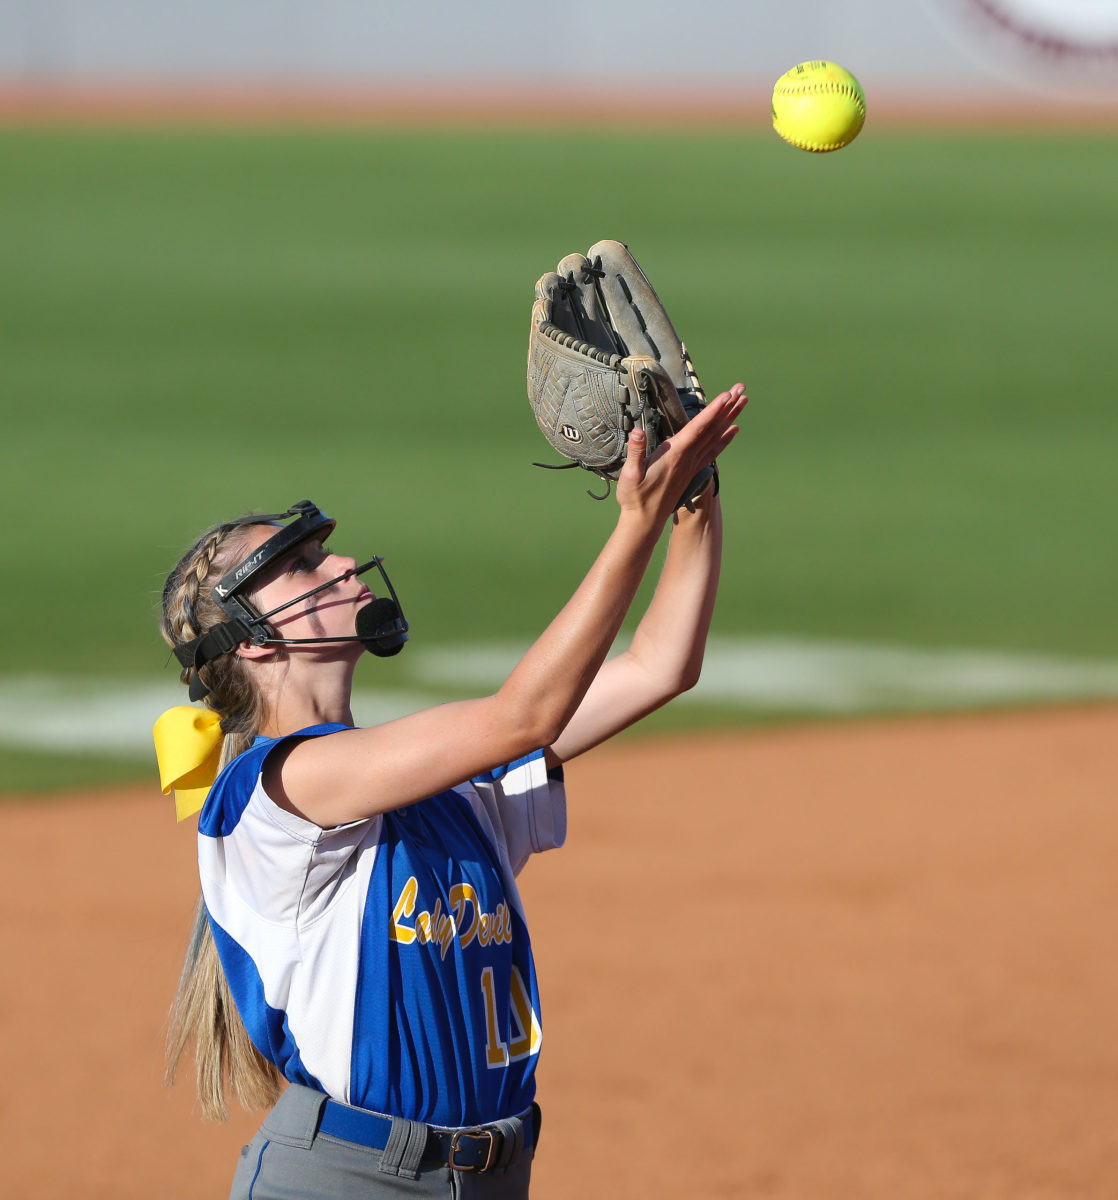 Booneville High School's Shaylea King (10) catches a fly ball at shortstop. Booneville and Raleigh played in game two of the MHSAA Class 3A Baseball Championship at Mississippi State University on Thursday, May 13, 2021. Photo by Keith Warren